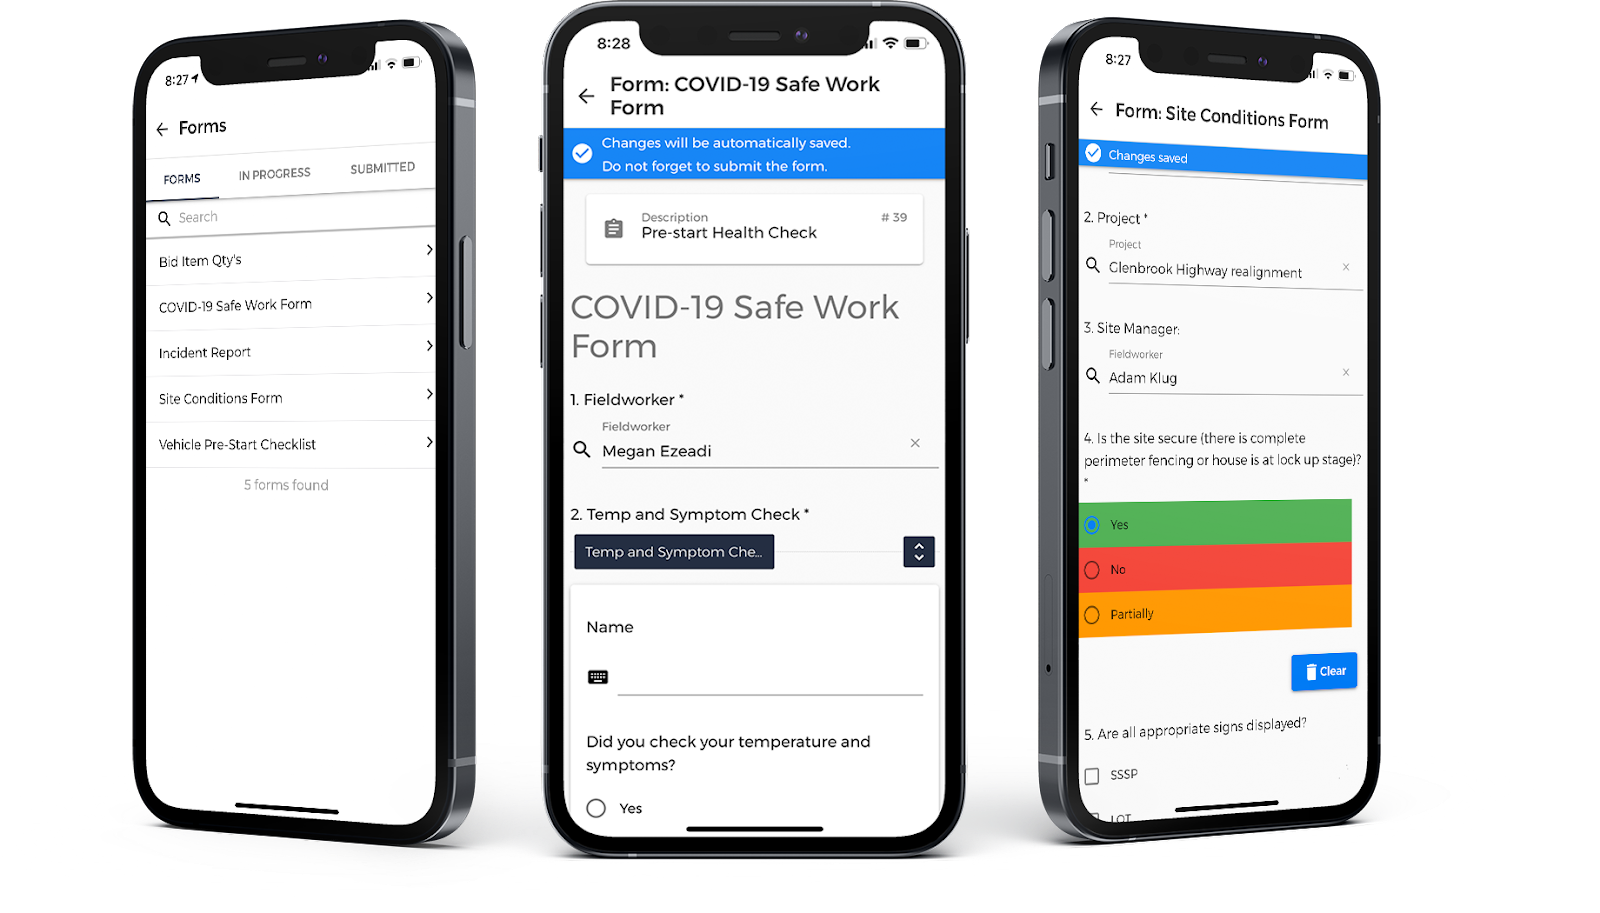 Forms for checking of health & safety compliance, equipment conditions, quality of work and many other use cases can be defined in the browser application and assigned to workers.